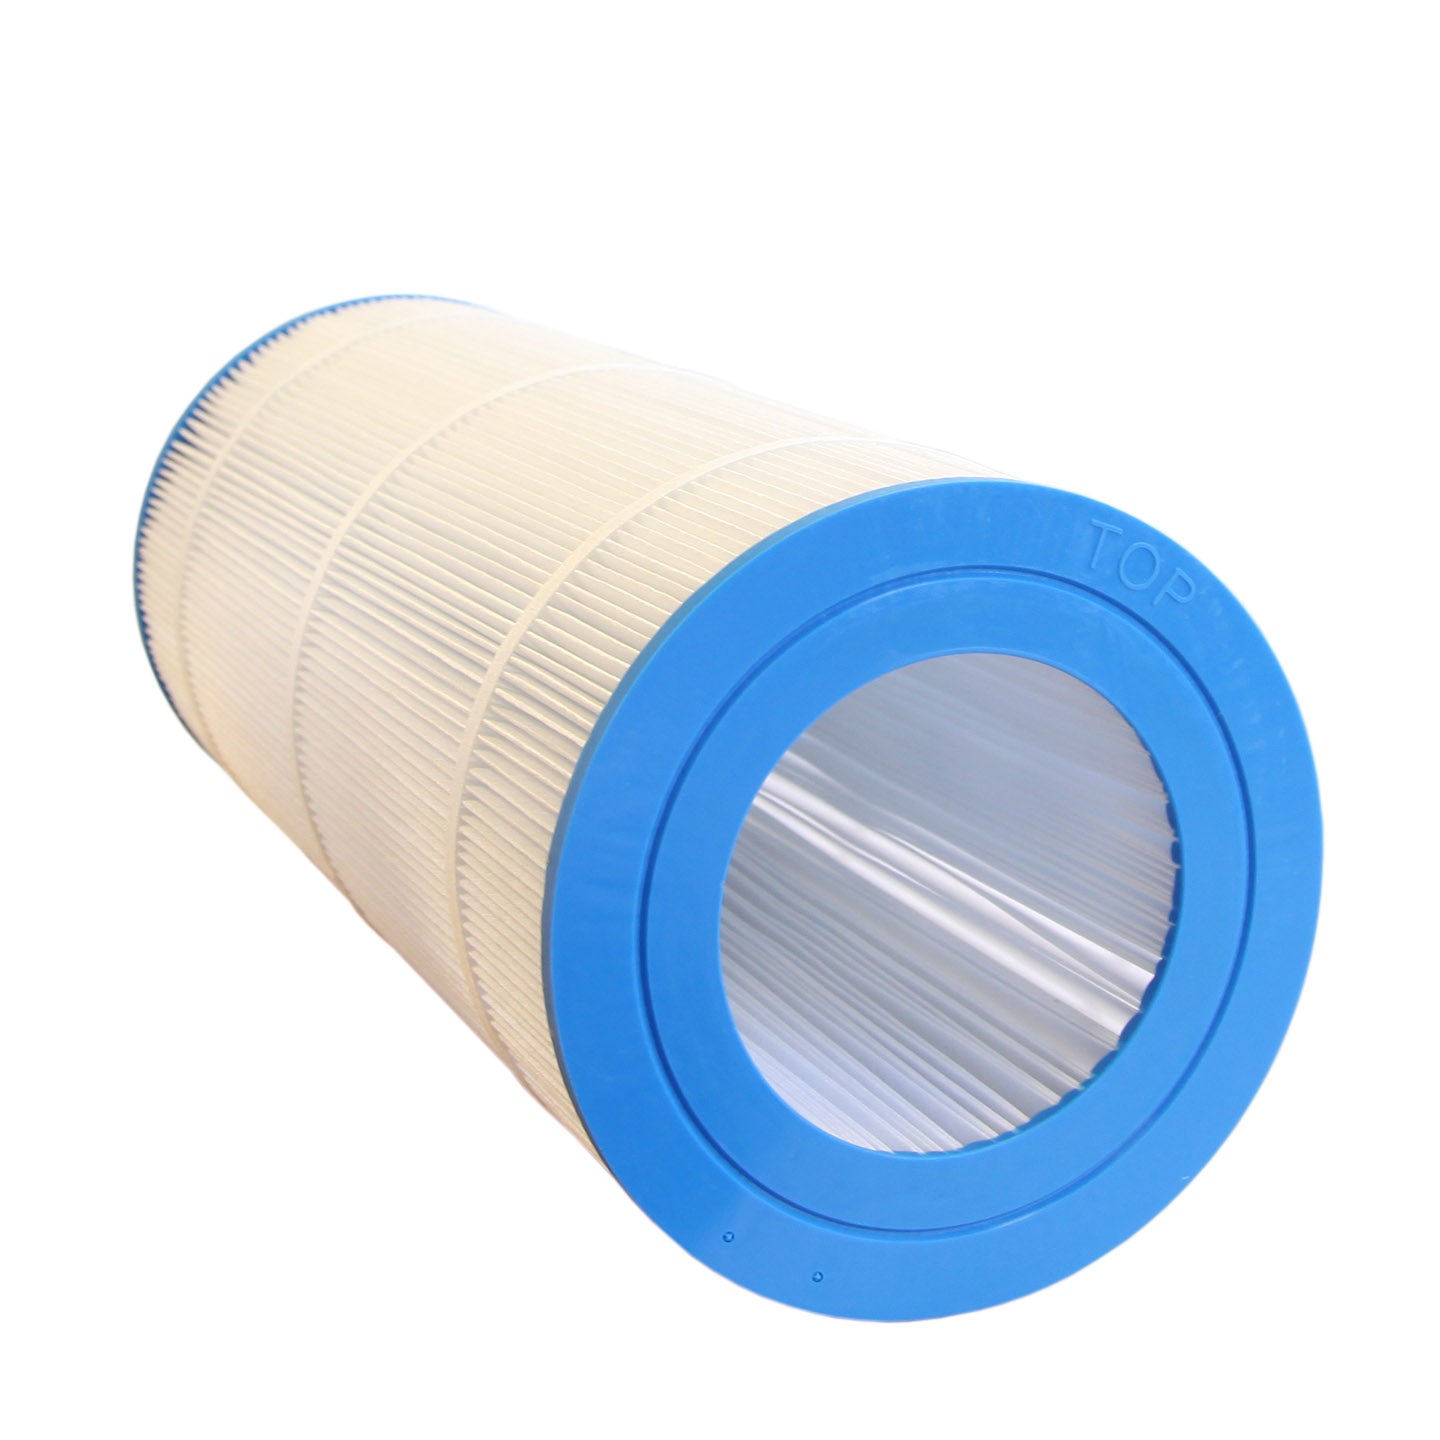 Tier1 Pleatco PAP100 and PAP100-4 Replacement Pool Filter